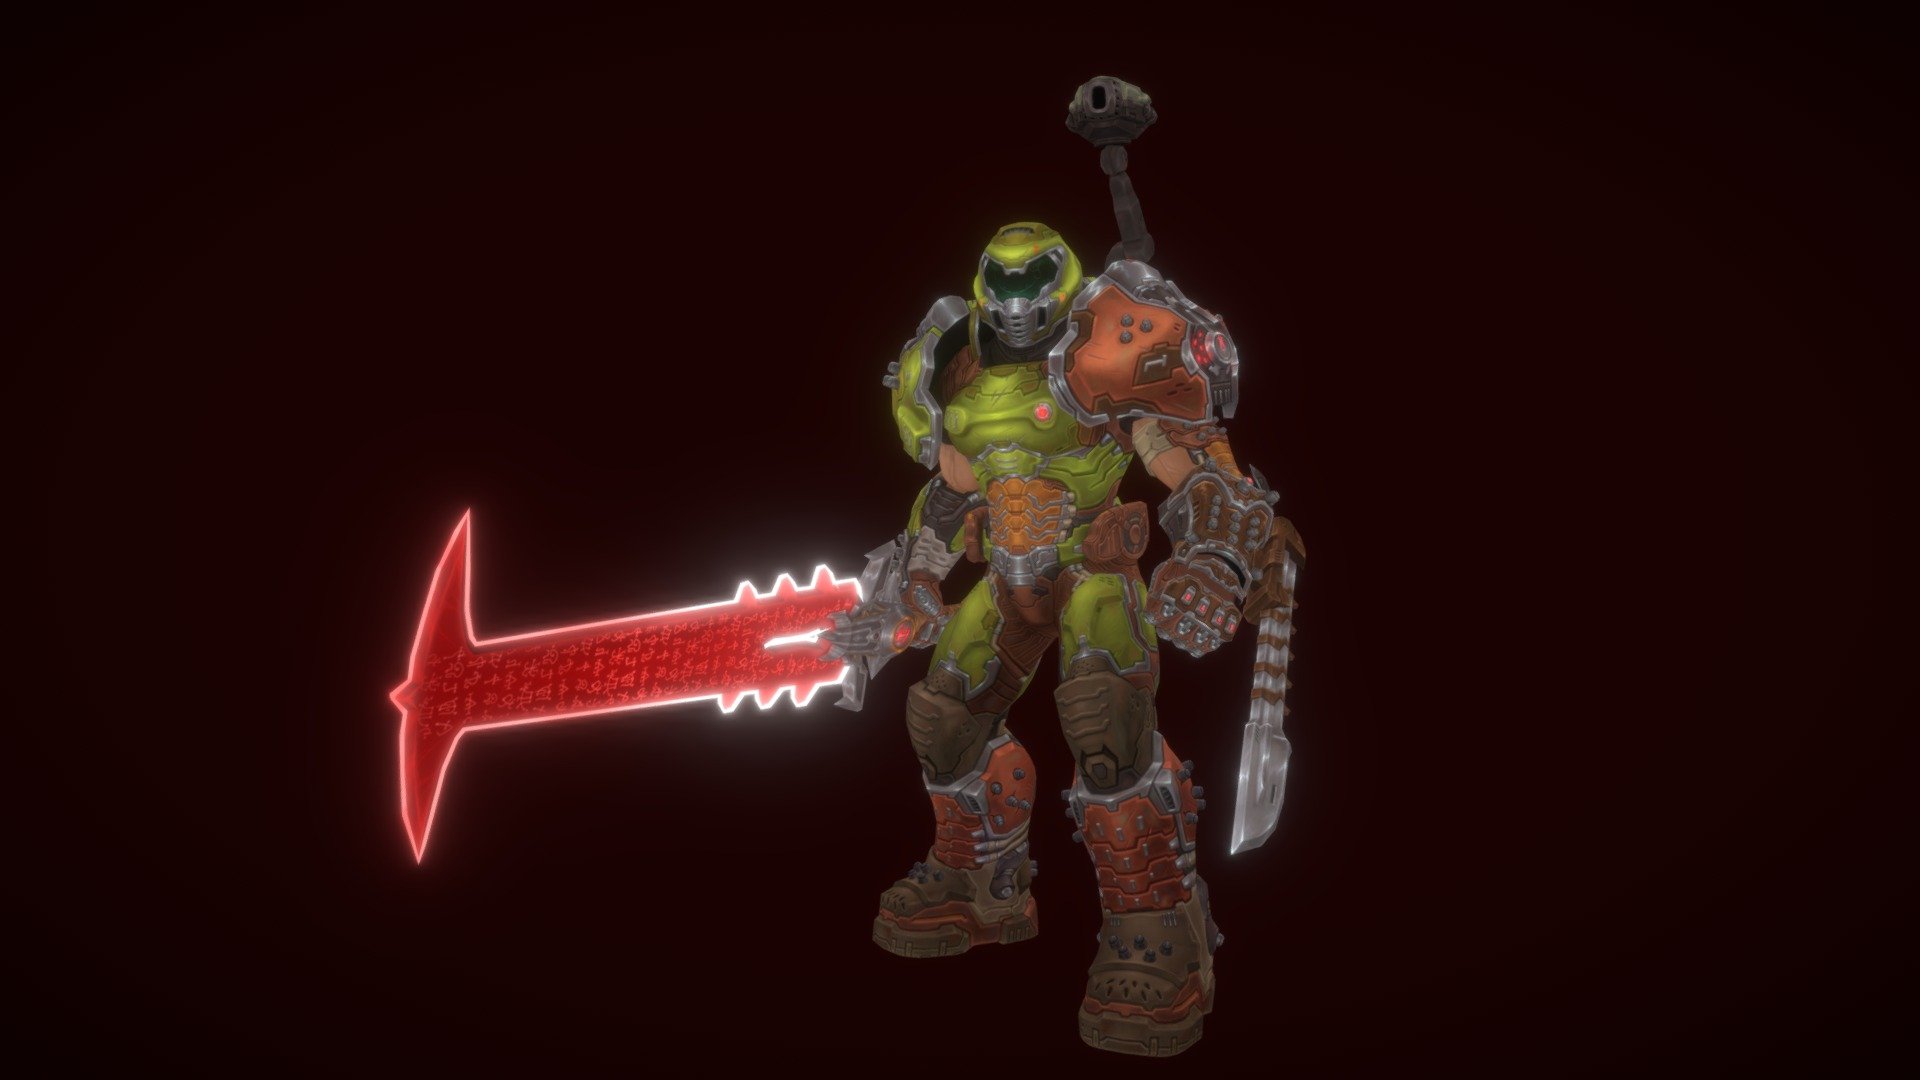 A handpainted study of the Doomslayer from Doom Eternal.
All done in Blender using the BPainter addon 3d model